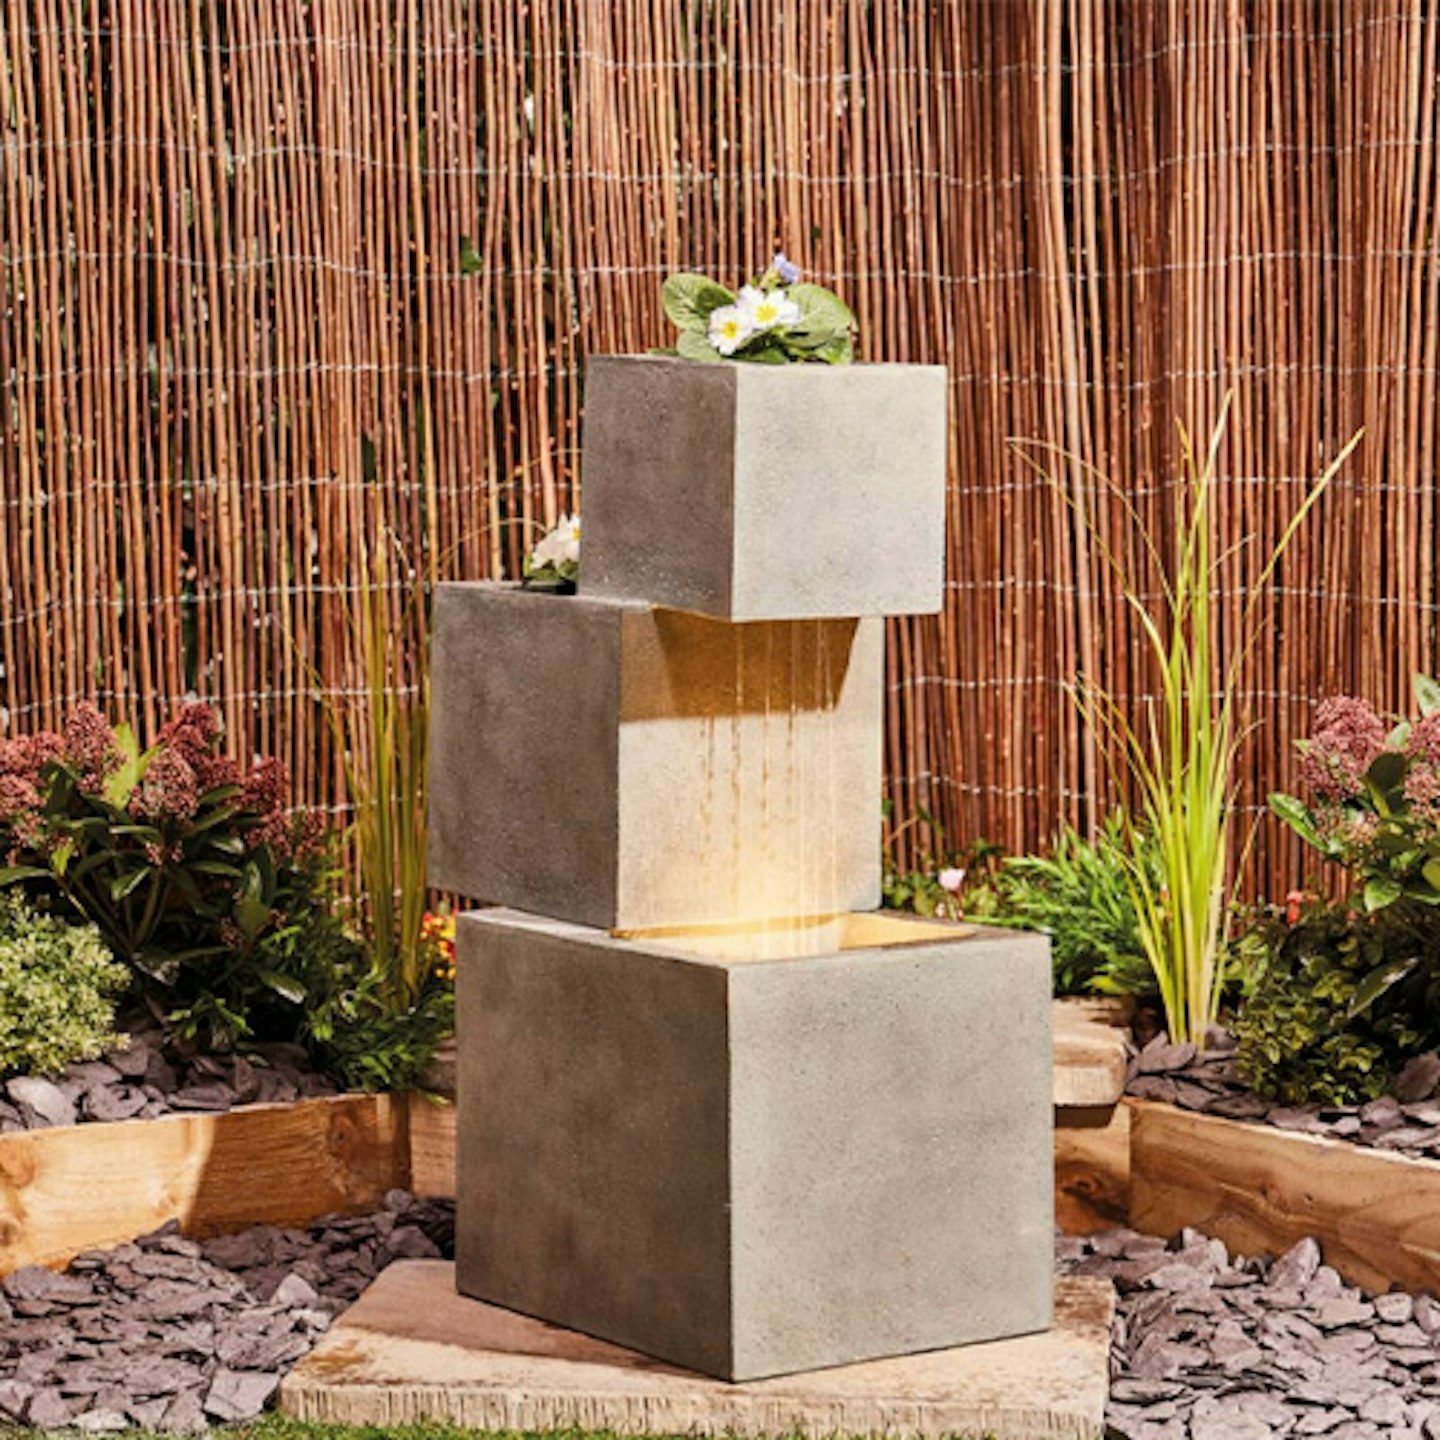 Serenity Cascade water feature with planters